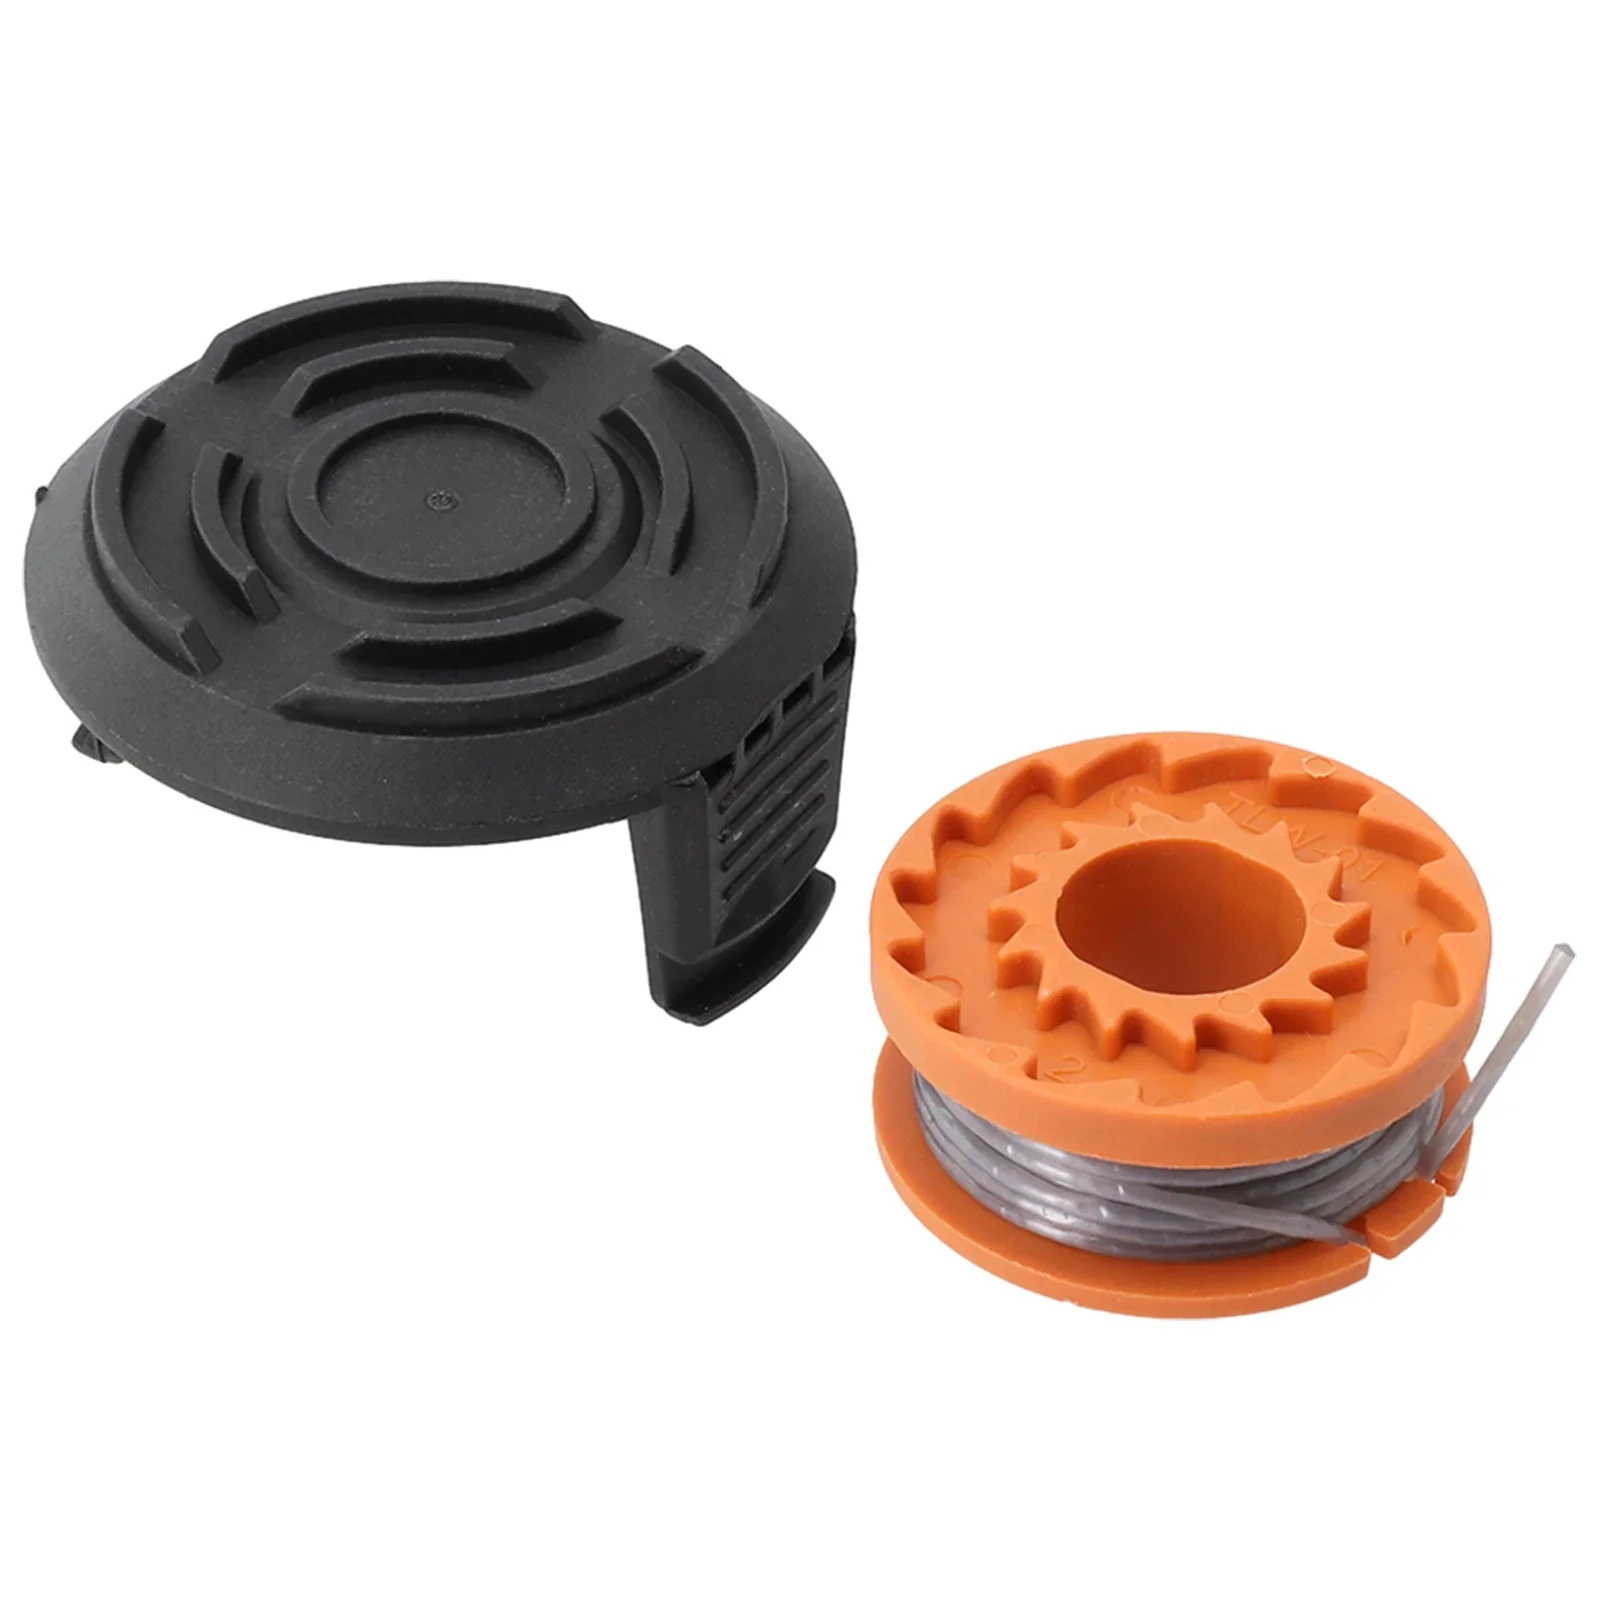 

Get More Out Of Your McGregor MCT1825 MCT2X1825 18v Strimmer Trimmer With Our Line Spool & Cover Replacement Set